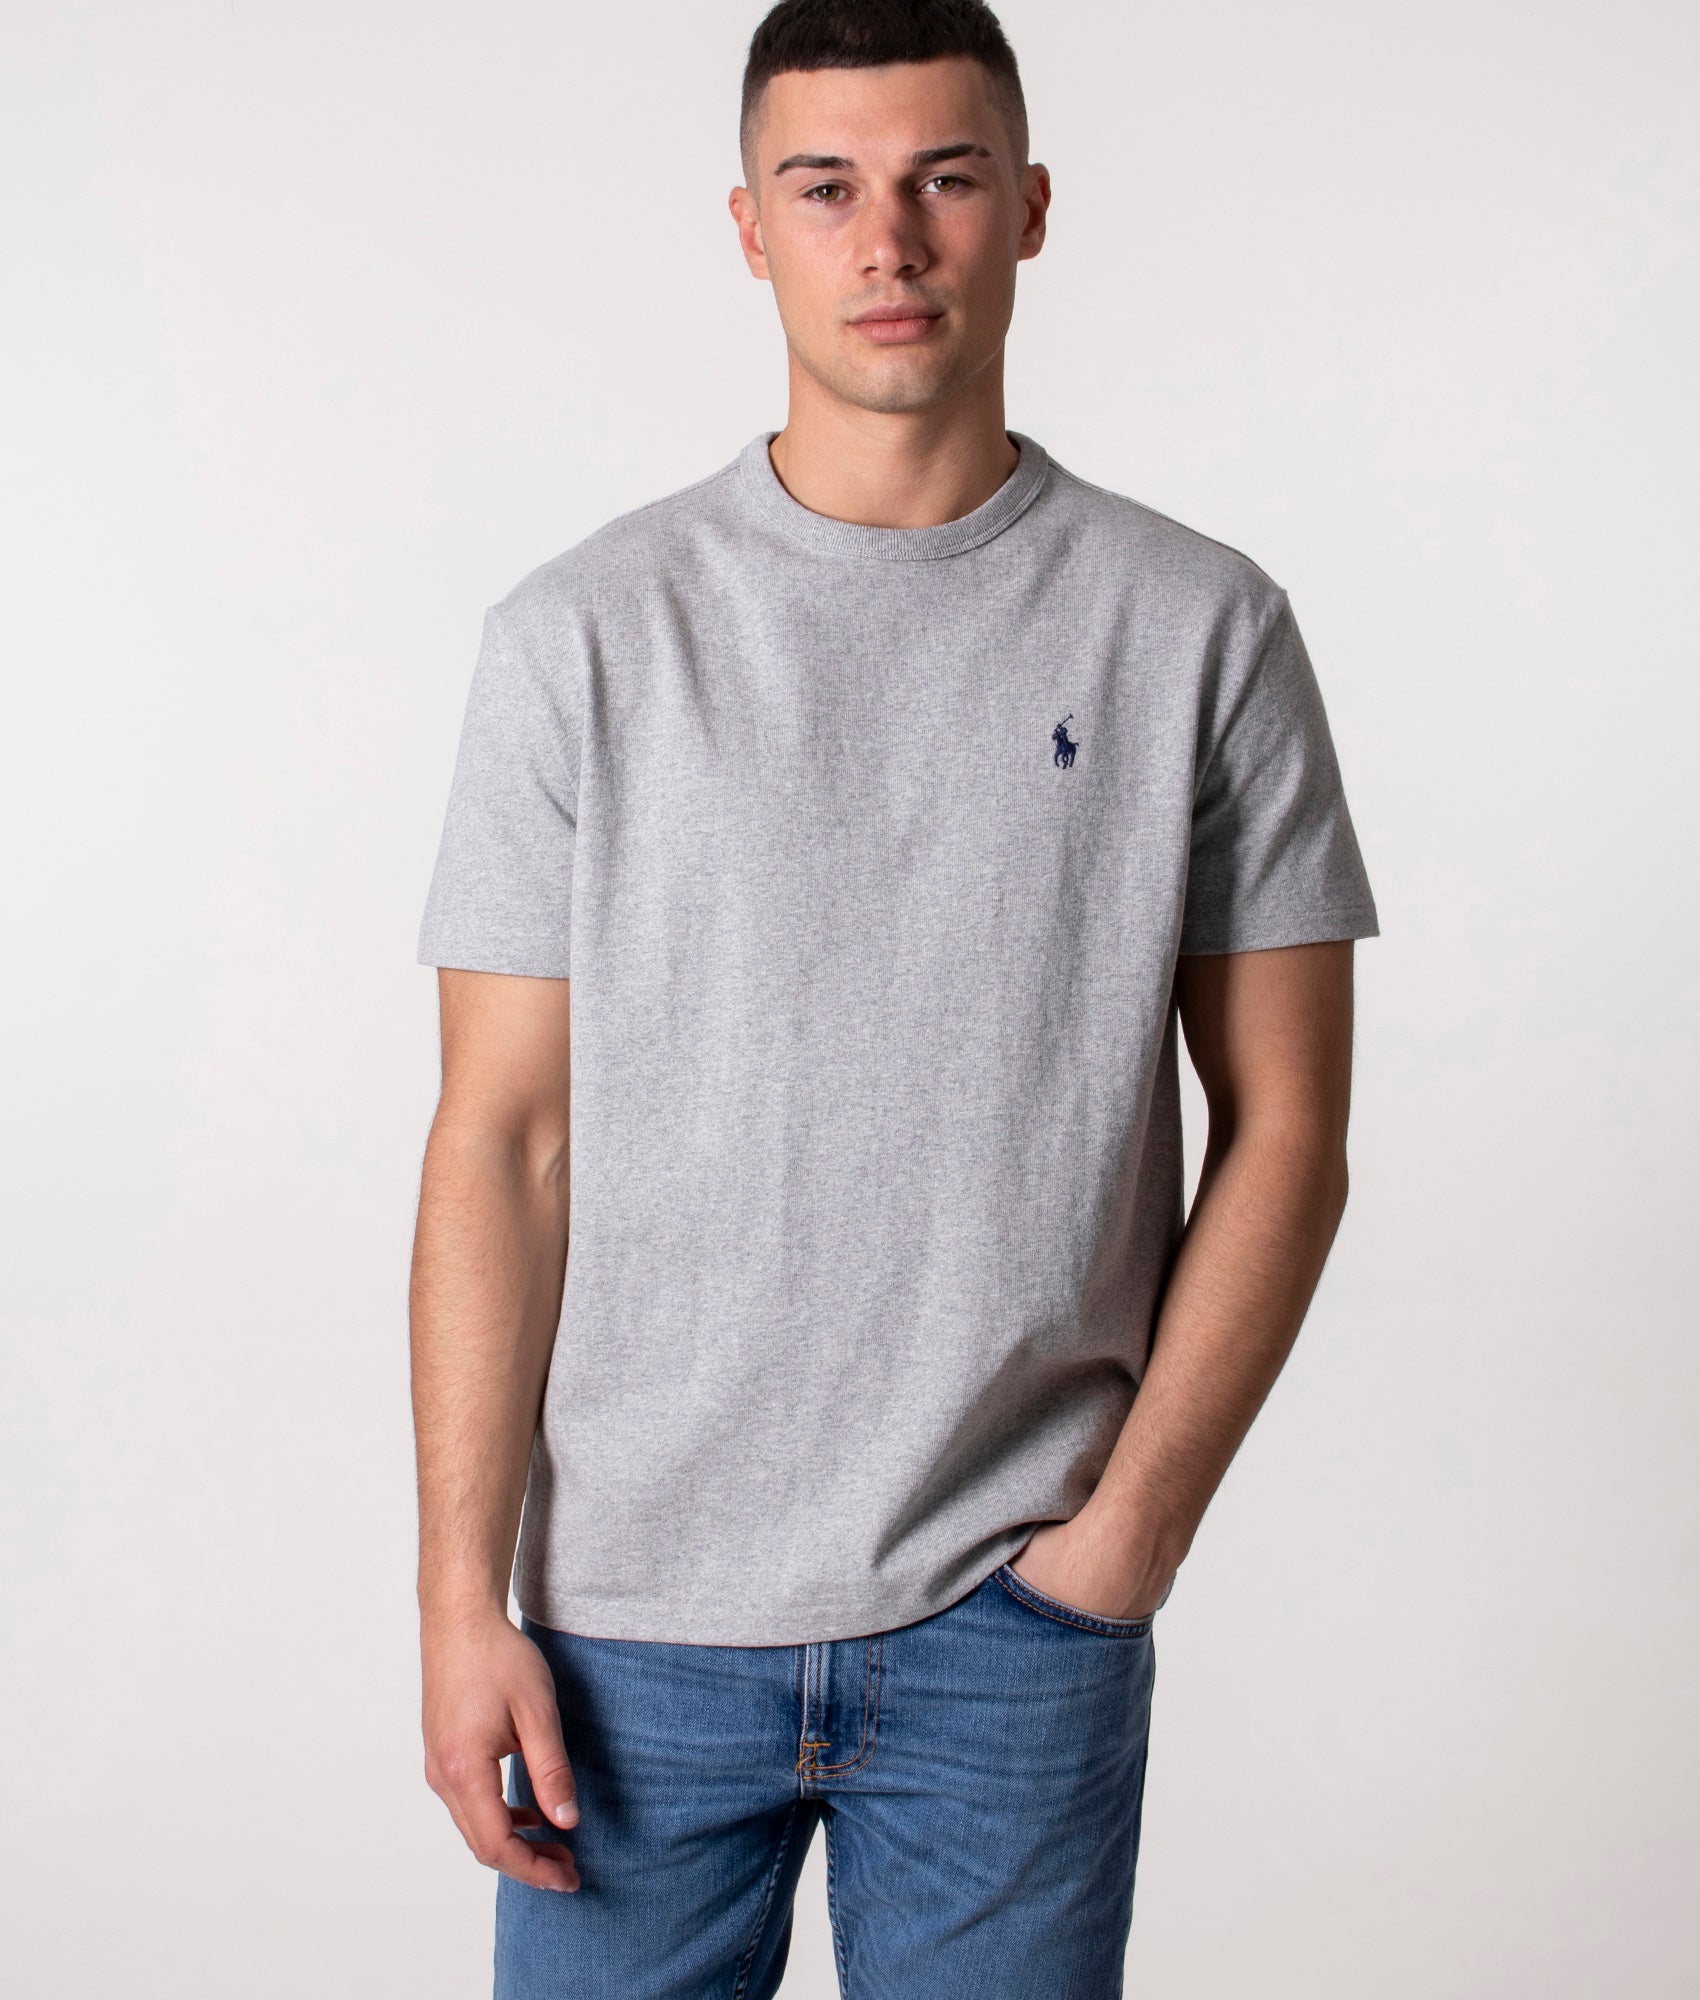 Polo Ralph Lauren Mens Classic Relaxed Fit Jersey T-Shirt - Colour: 004 Andover Heather - Size: XL